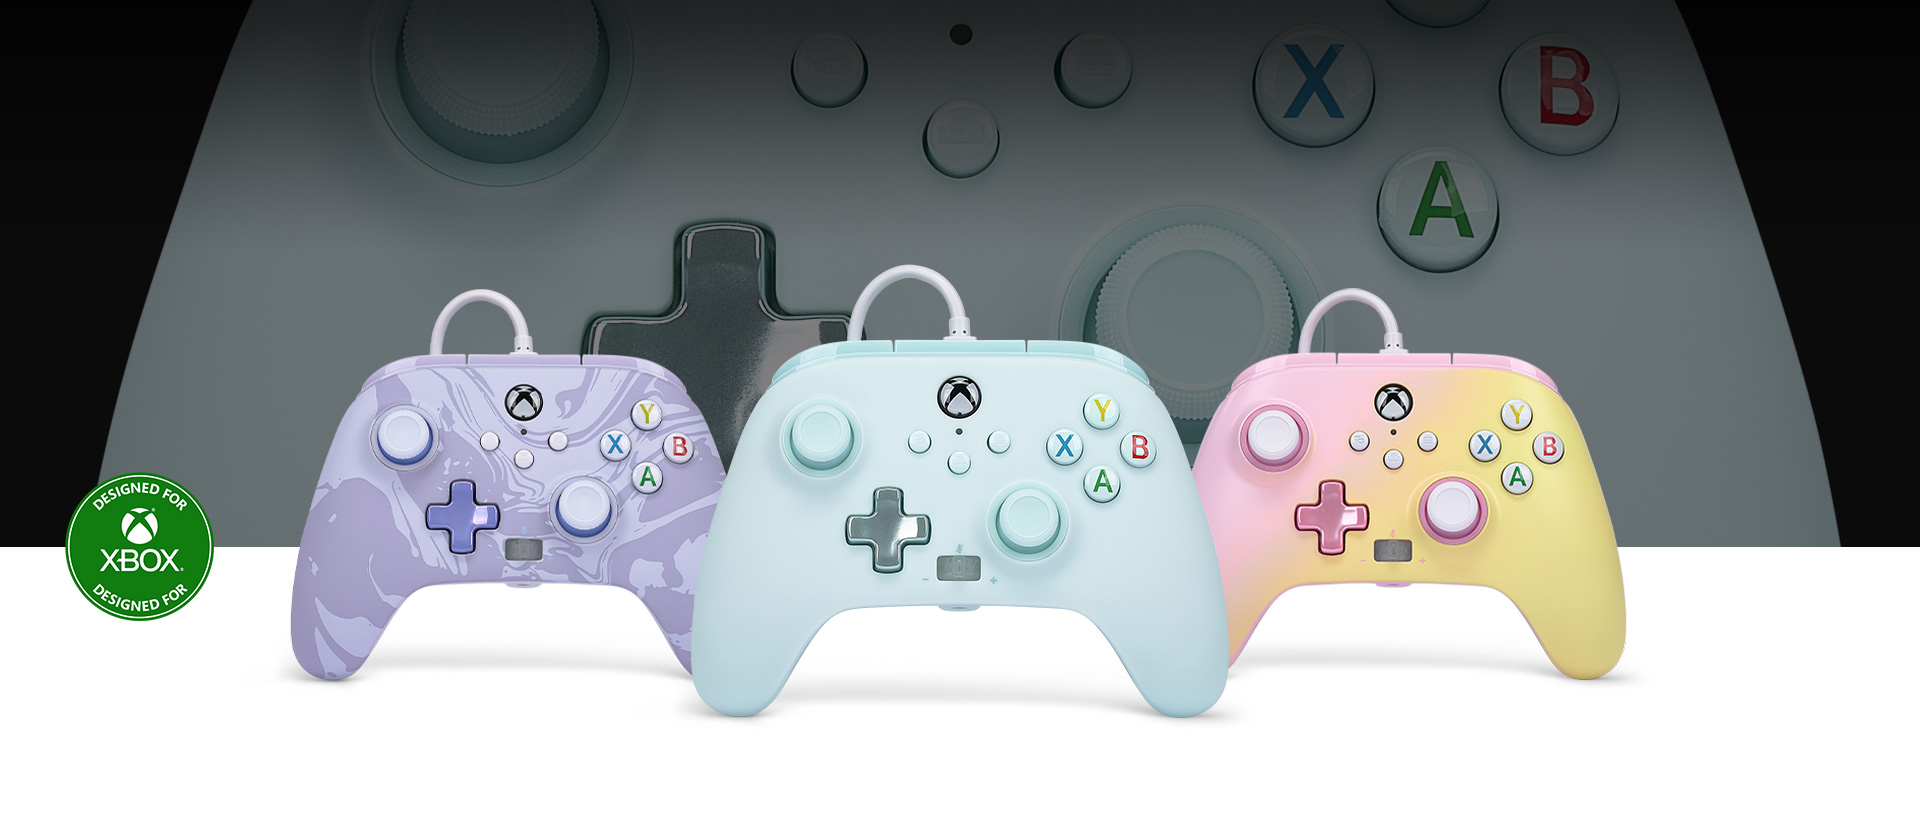 Designed for Xbox logo, Cotton Candy Blue controller in front with the Lavender Swirl and Pink Lemonade controllers beside it